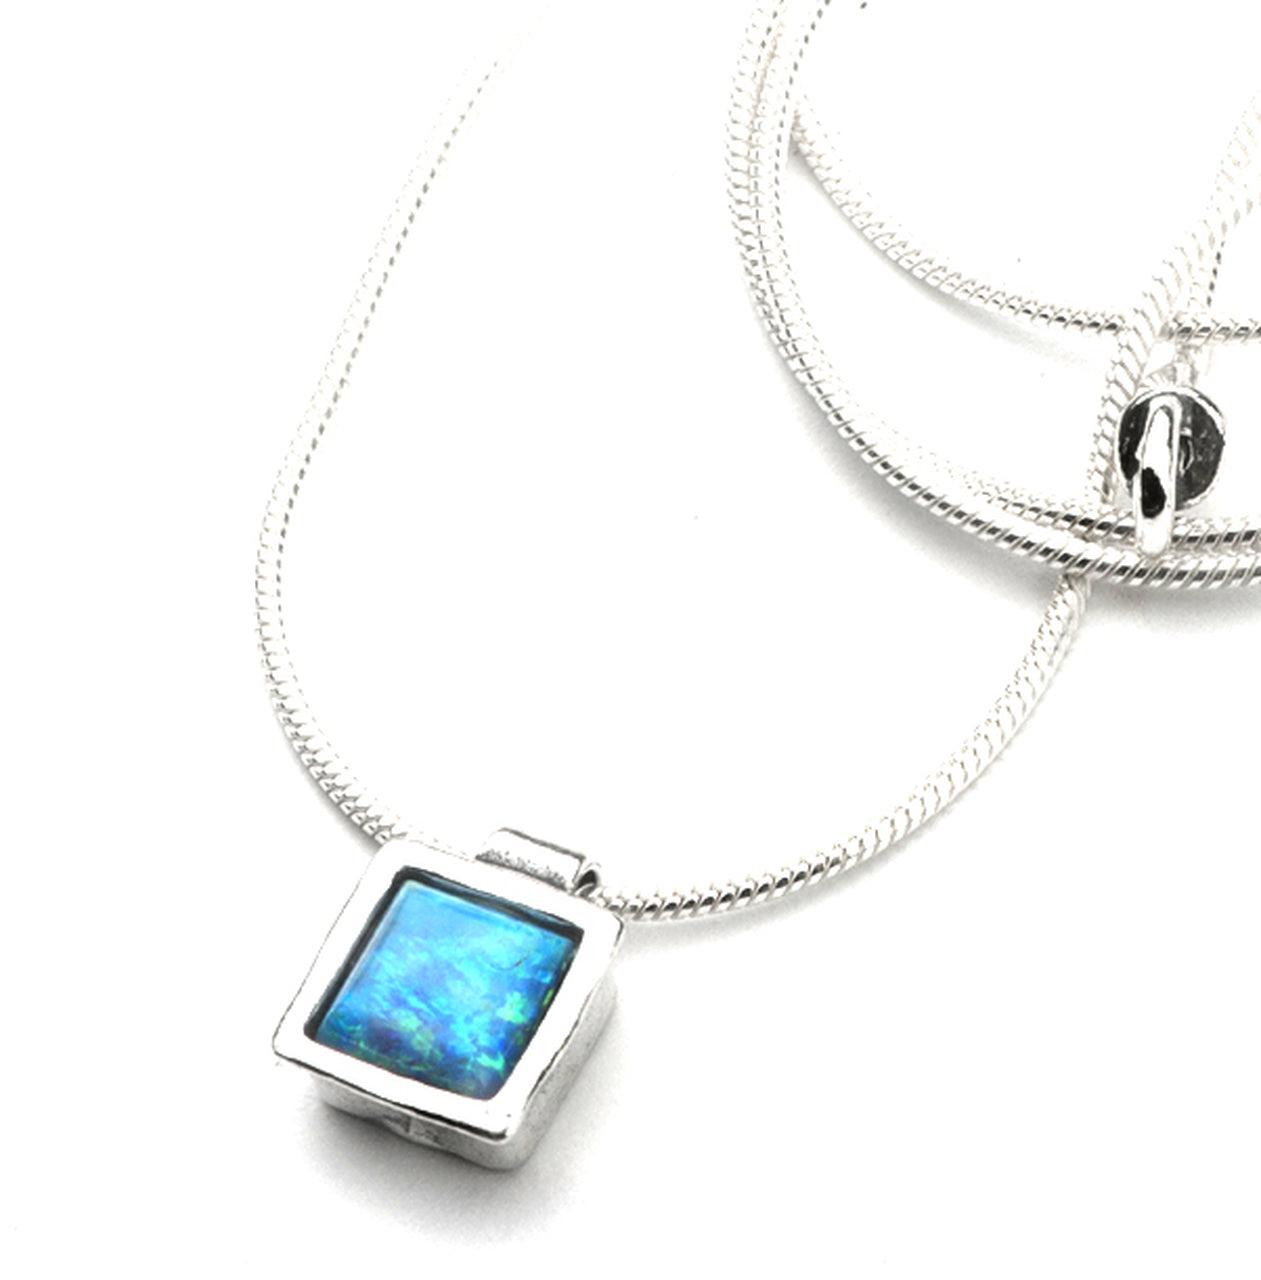 Square Opal Necklace - The Nancy Smillie Shop - Art, Jewellery & Designer Gifts Glasgow